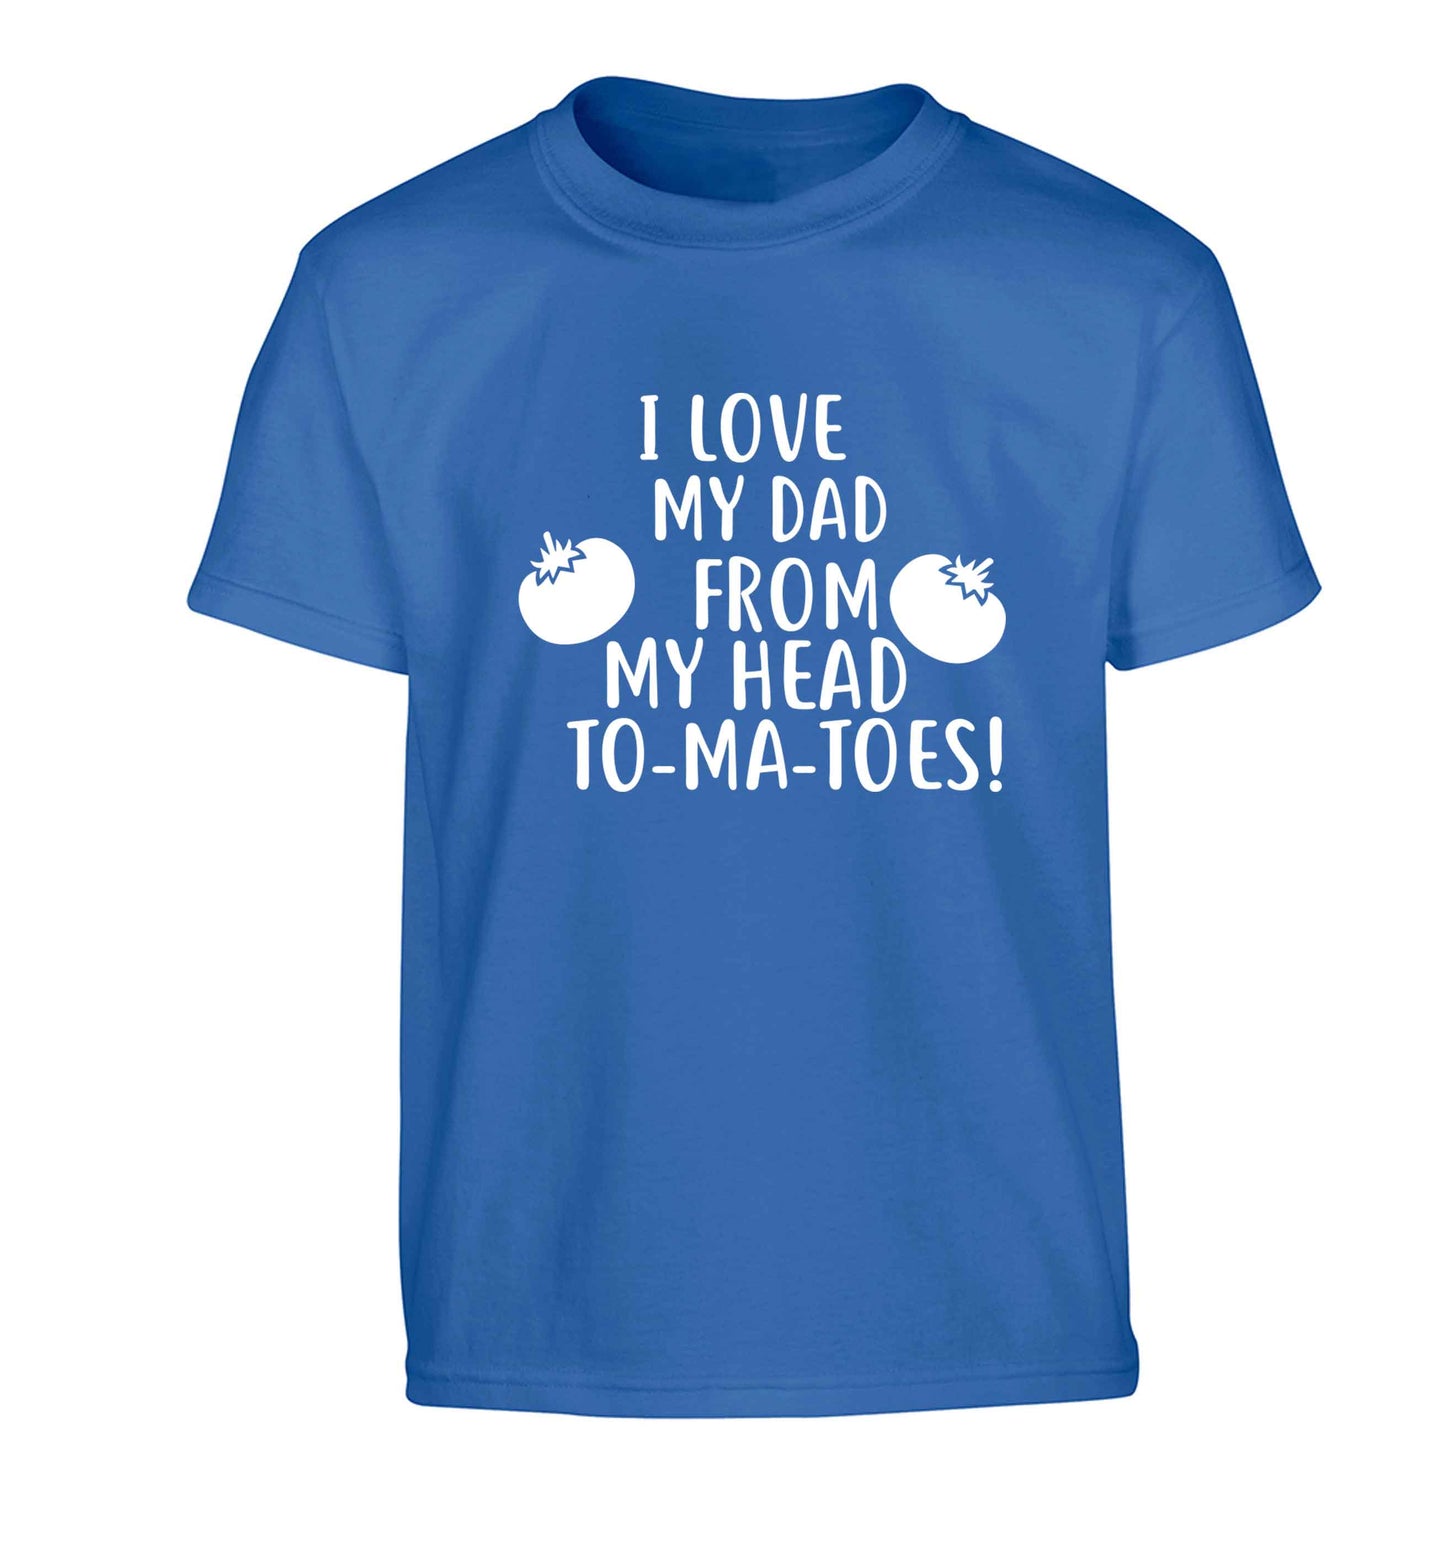 I love my dad from my head to-ma-toes Children's blue Tshirt 12-13 Years